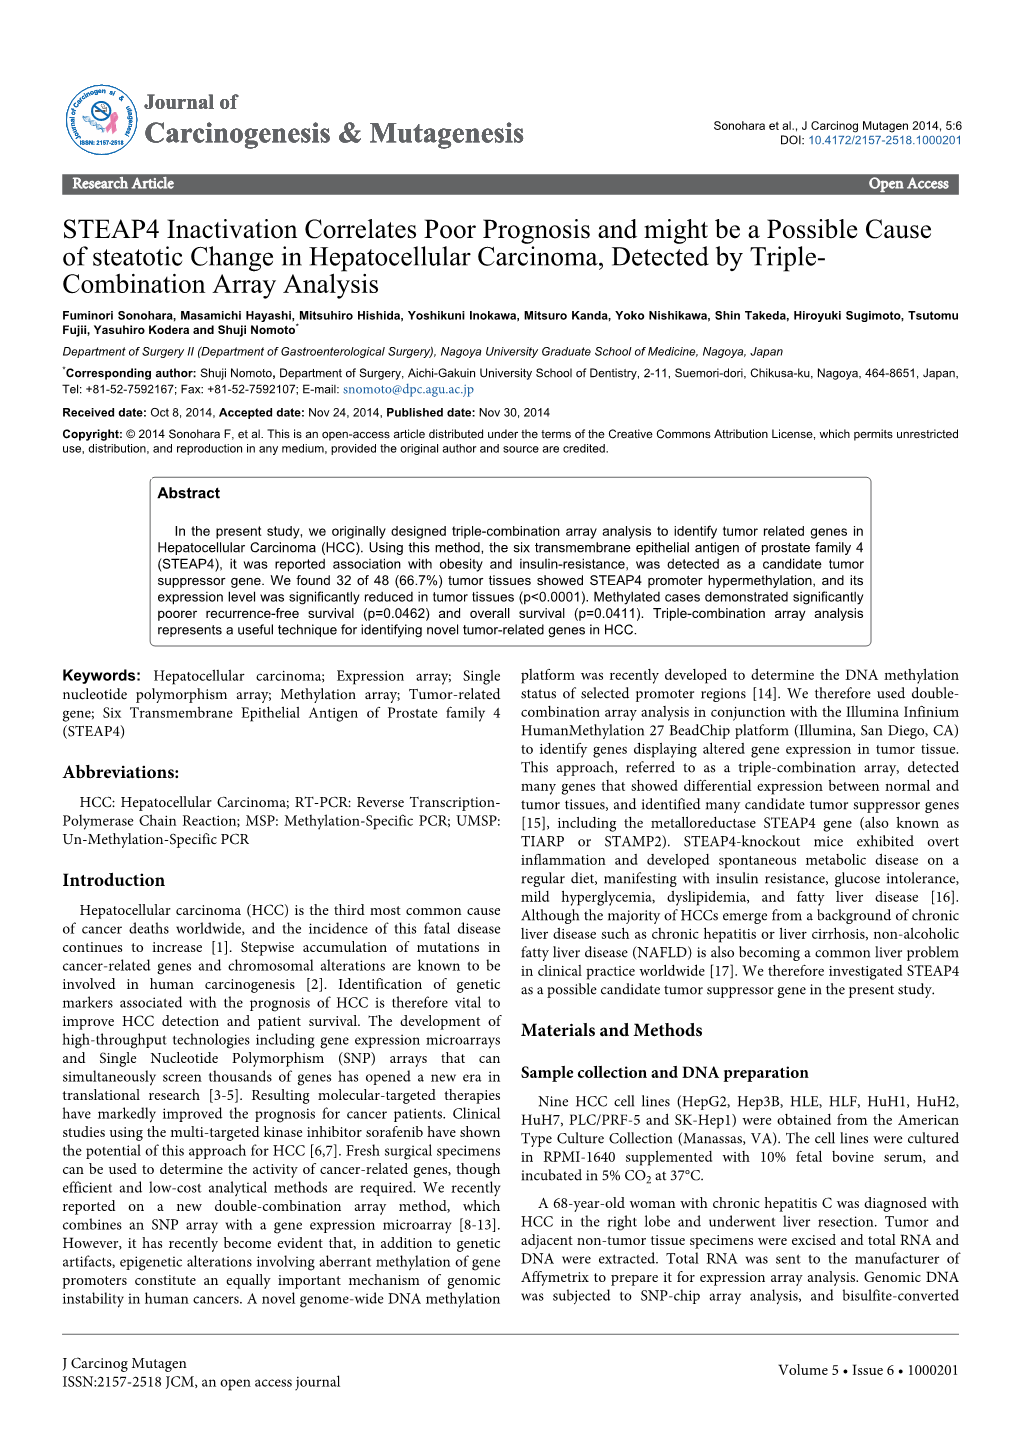 STEAP4 Inactivation Correlates Poor Prognosis and Might Be a Possible